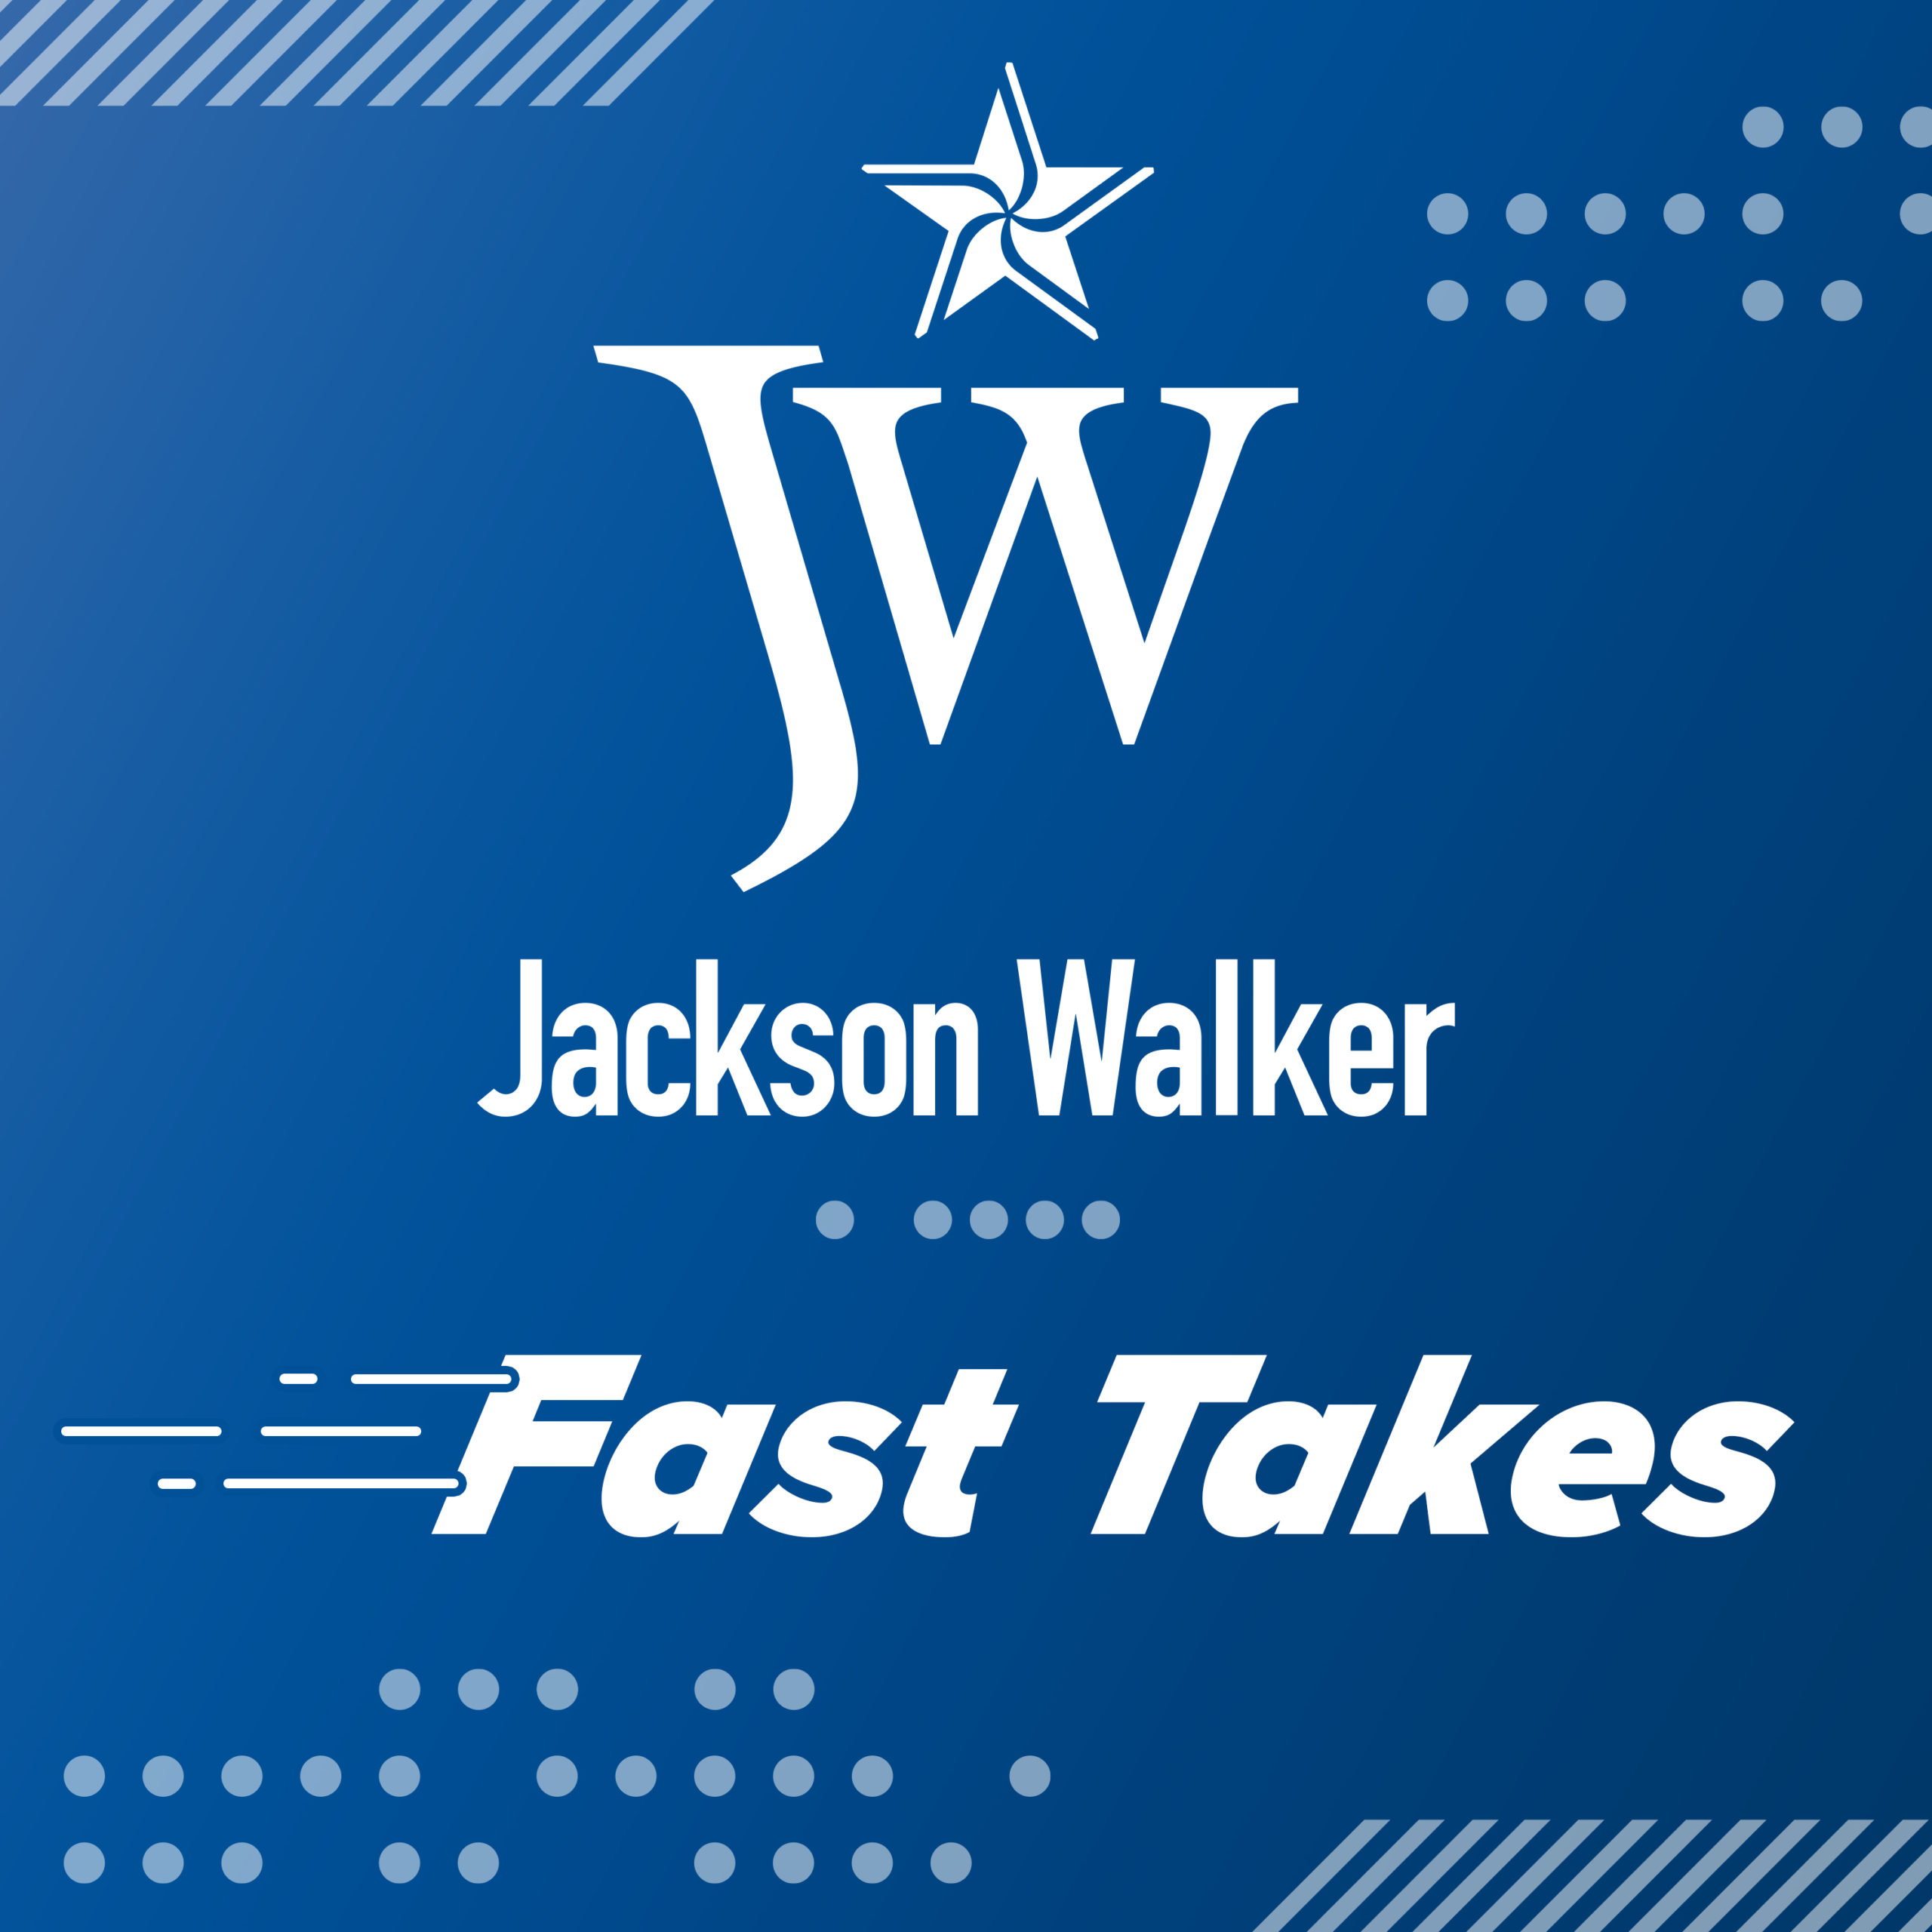 JW Fast Takes cover art graphic